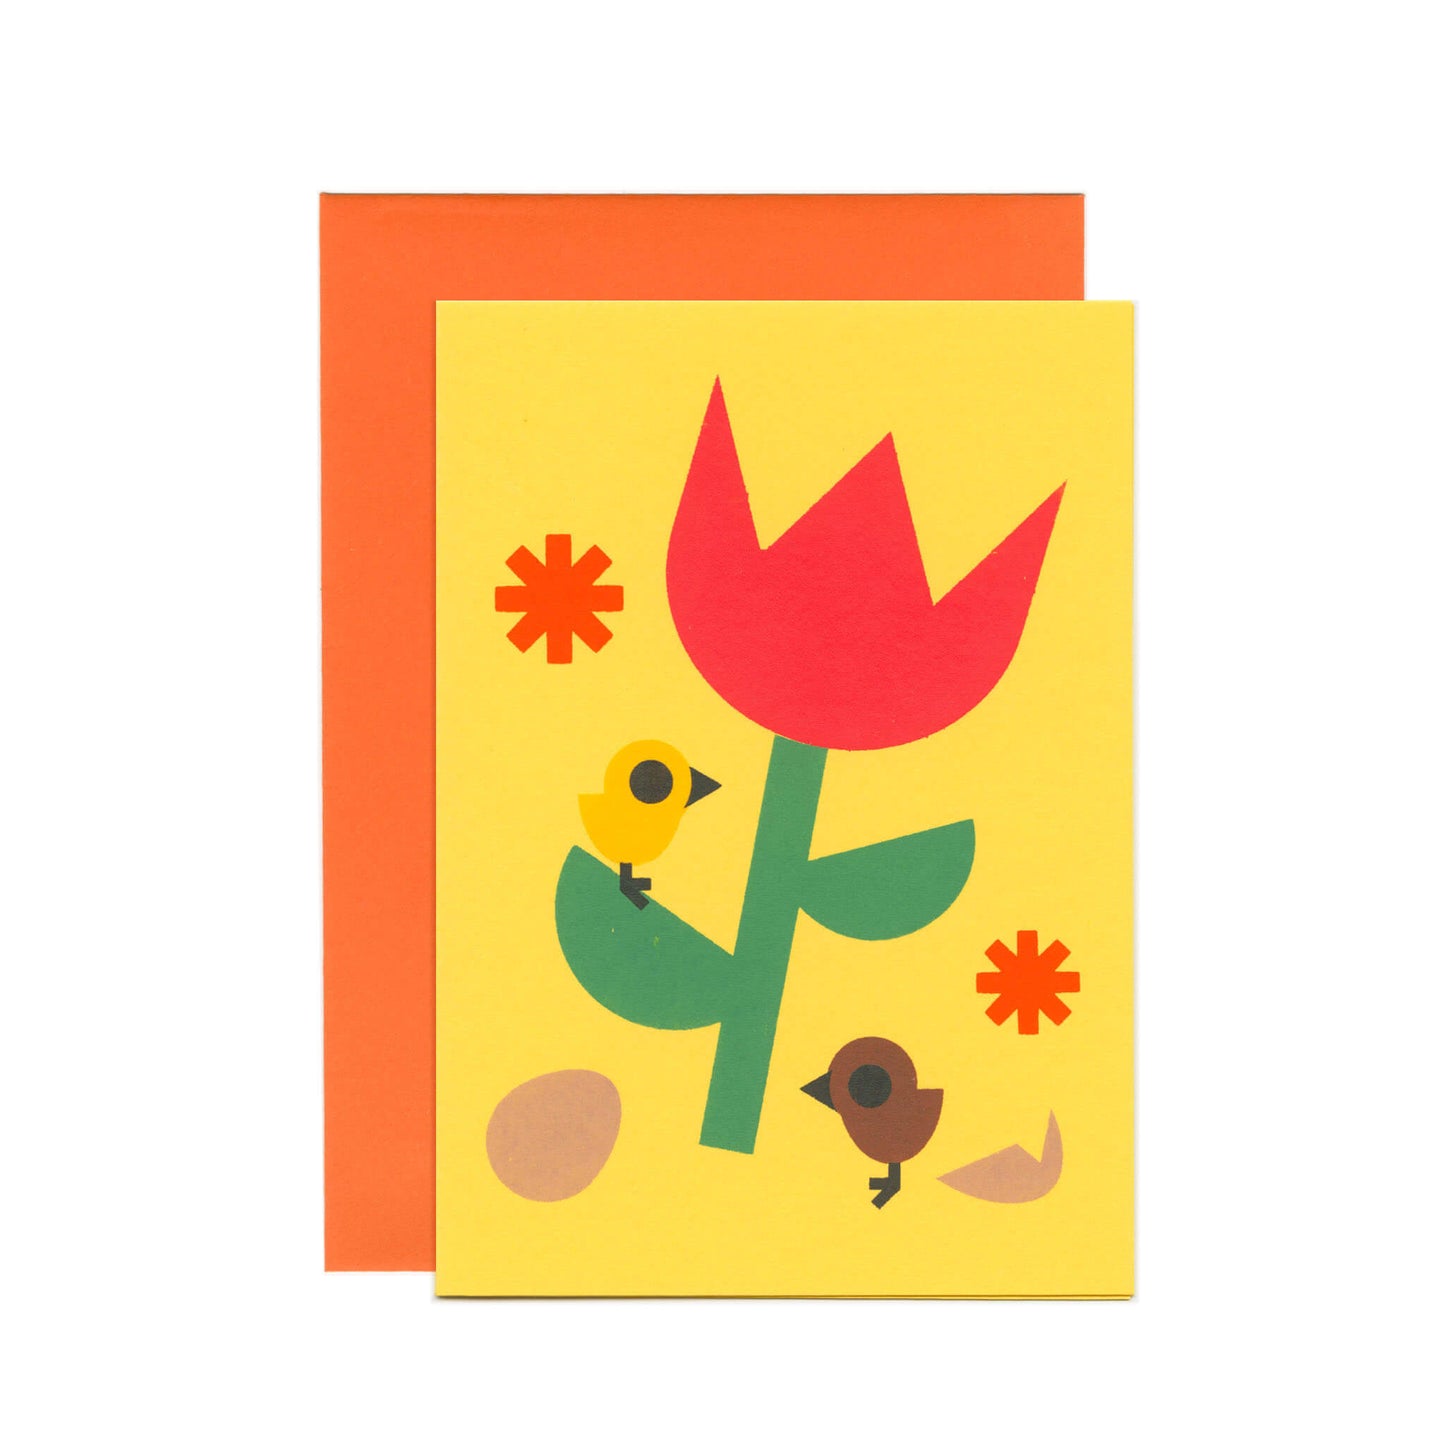 A yellow card with an illustration of a tulip, flowers, chicks and egg. Behind the card there's an orange envelope.